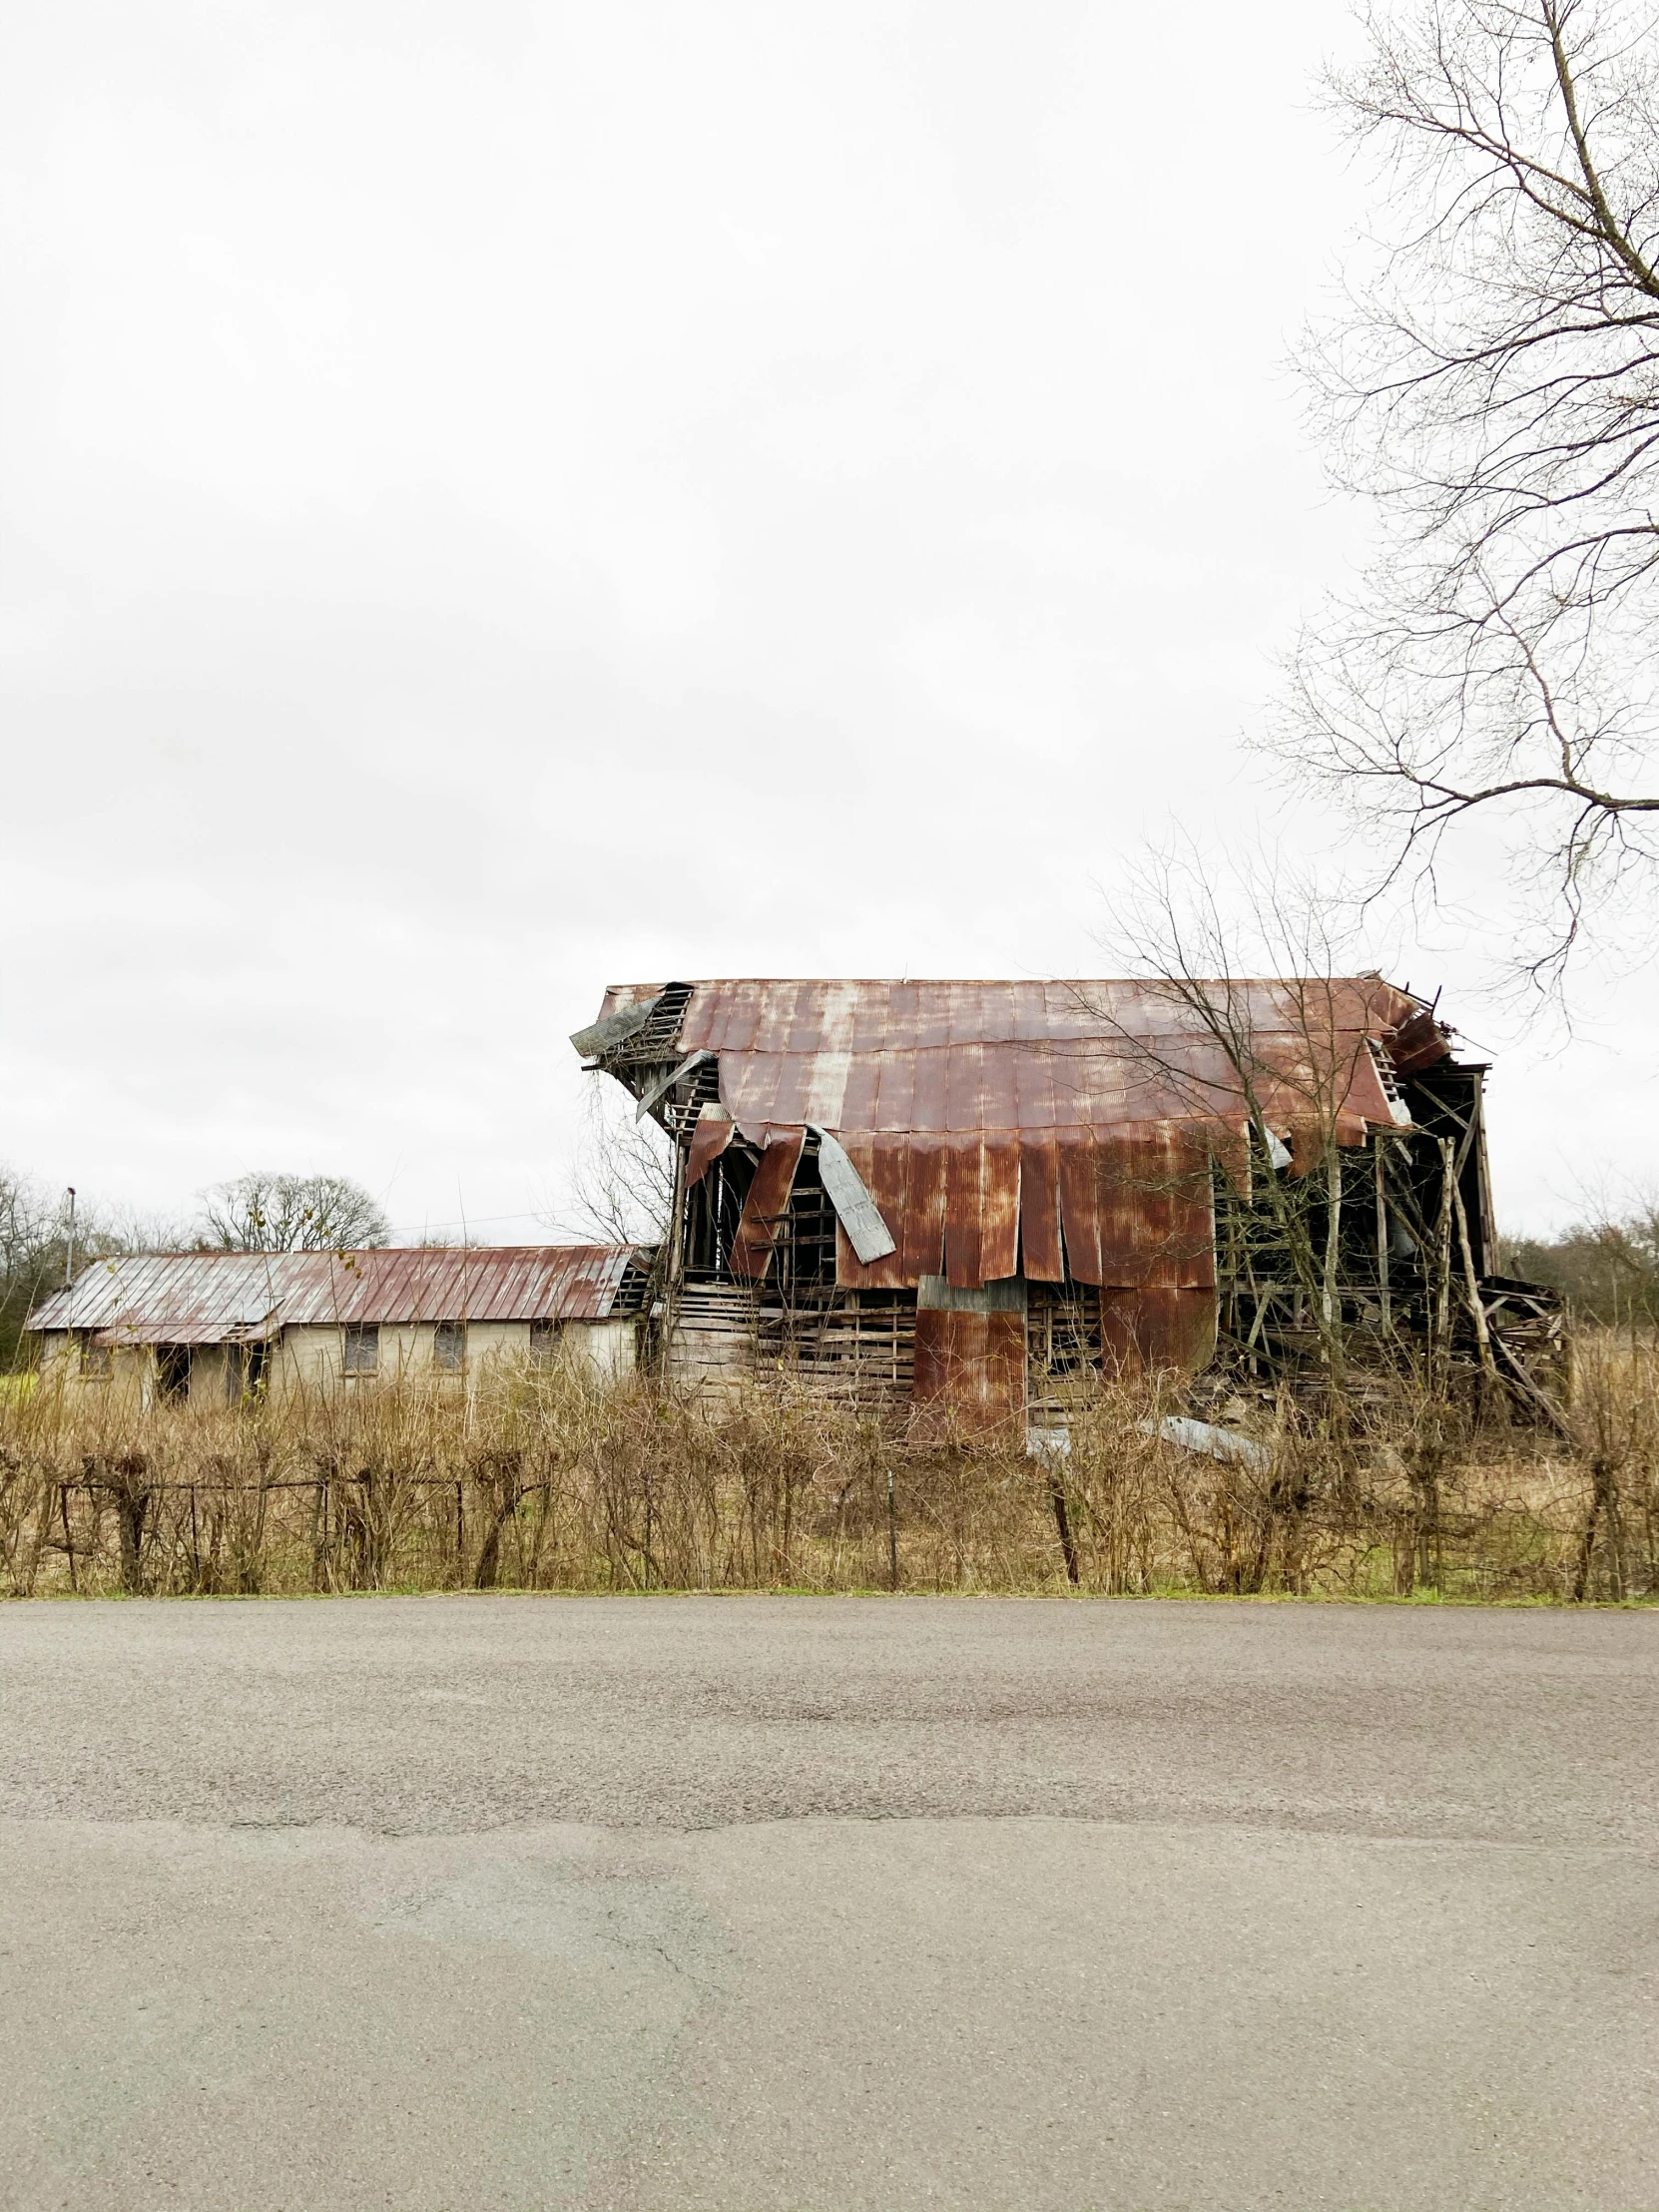 a red fire hydrant sitting on the side of a road, by Kristin Nelson, renaissance, barn, collapsed brutalist architecture, 8 k -, still photograph